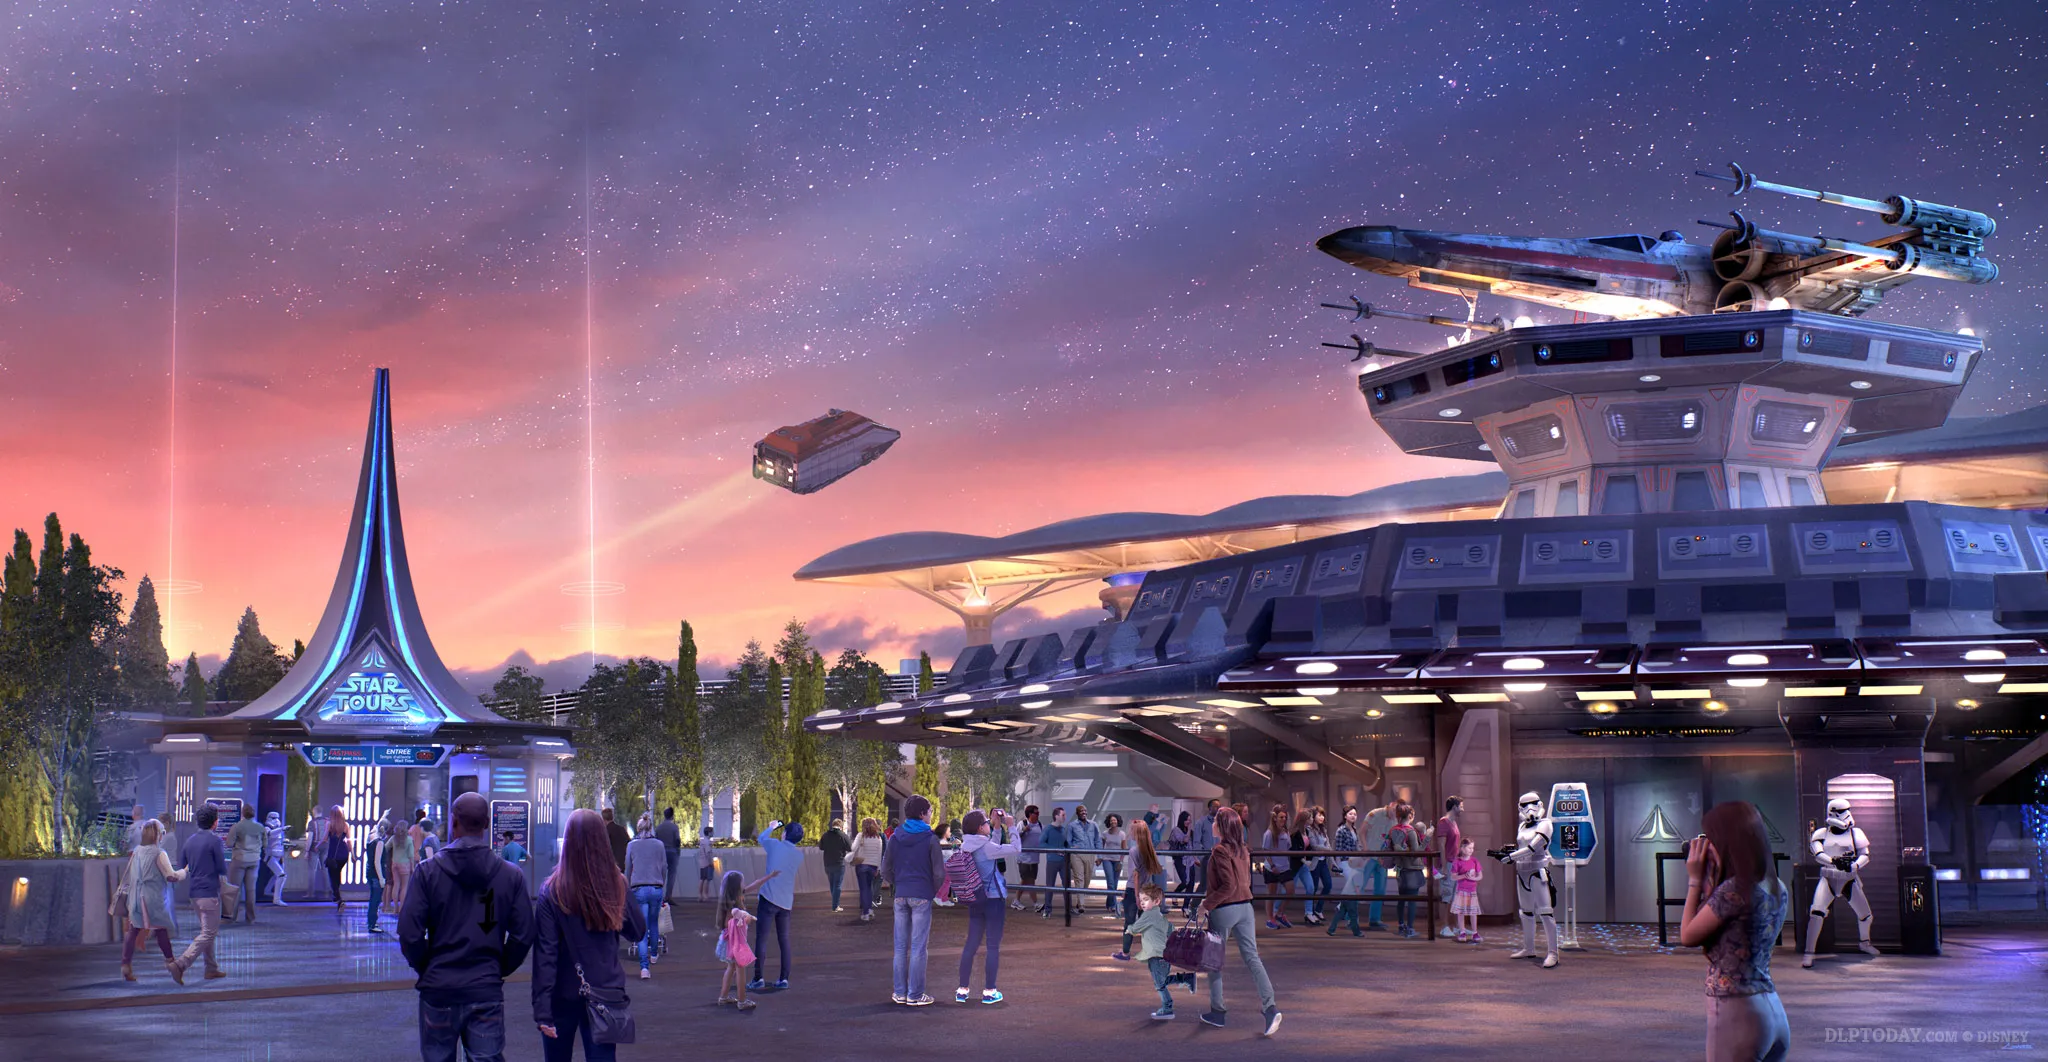 BREAKING NEWS: New Scenes and Adventures Coming to Star Tours in 2024!